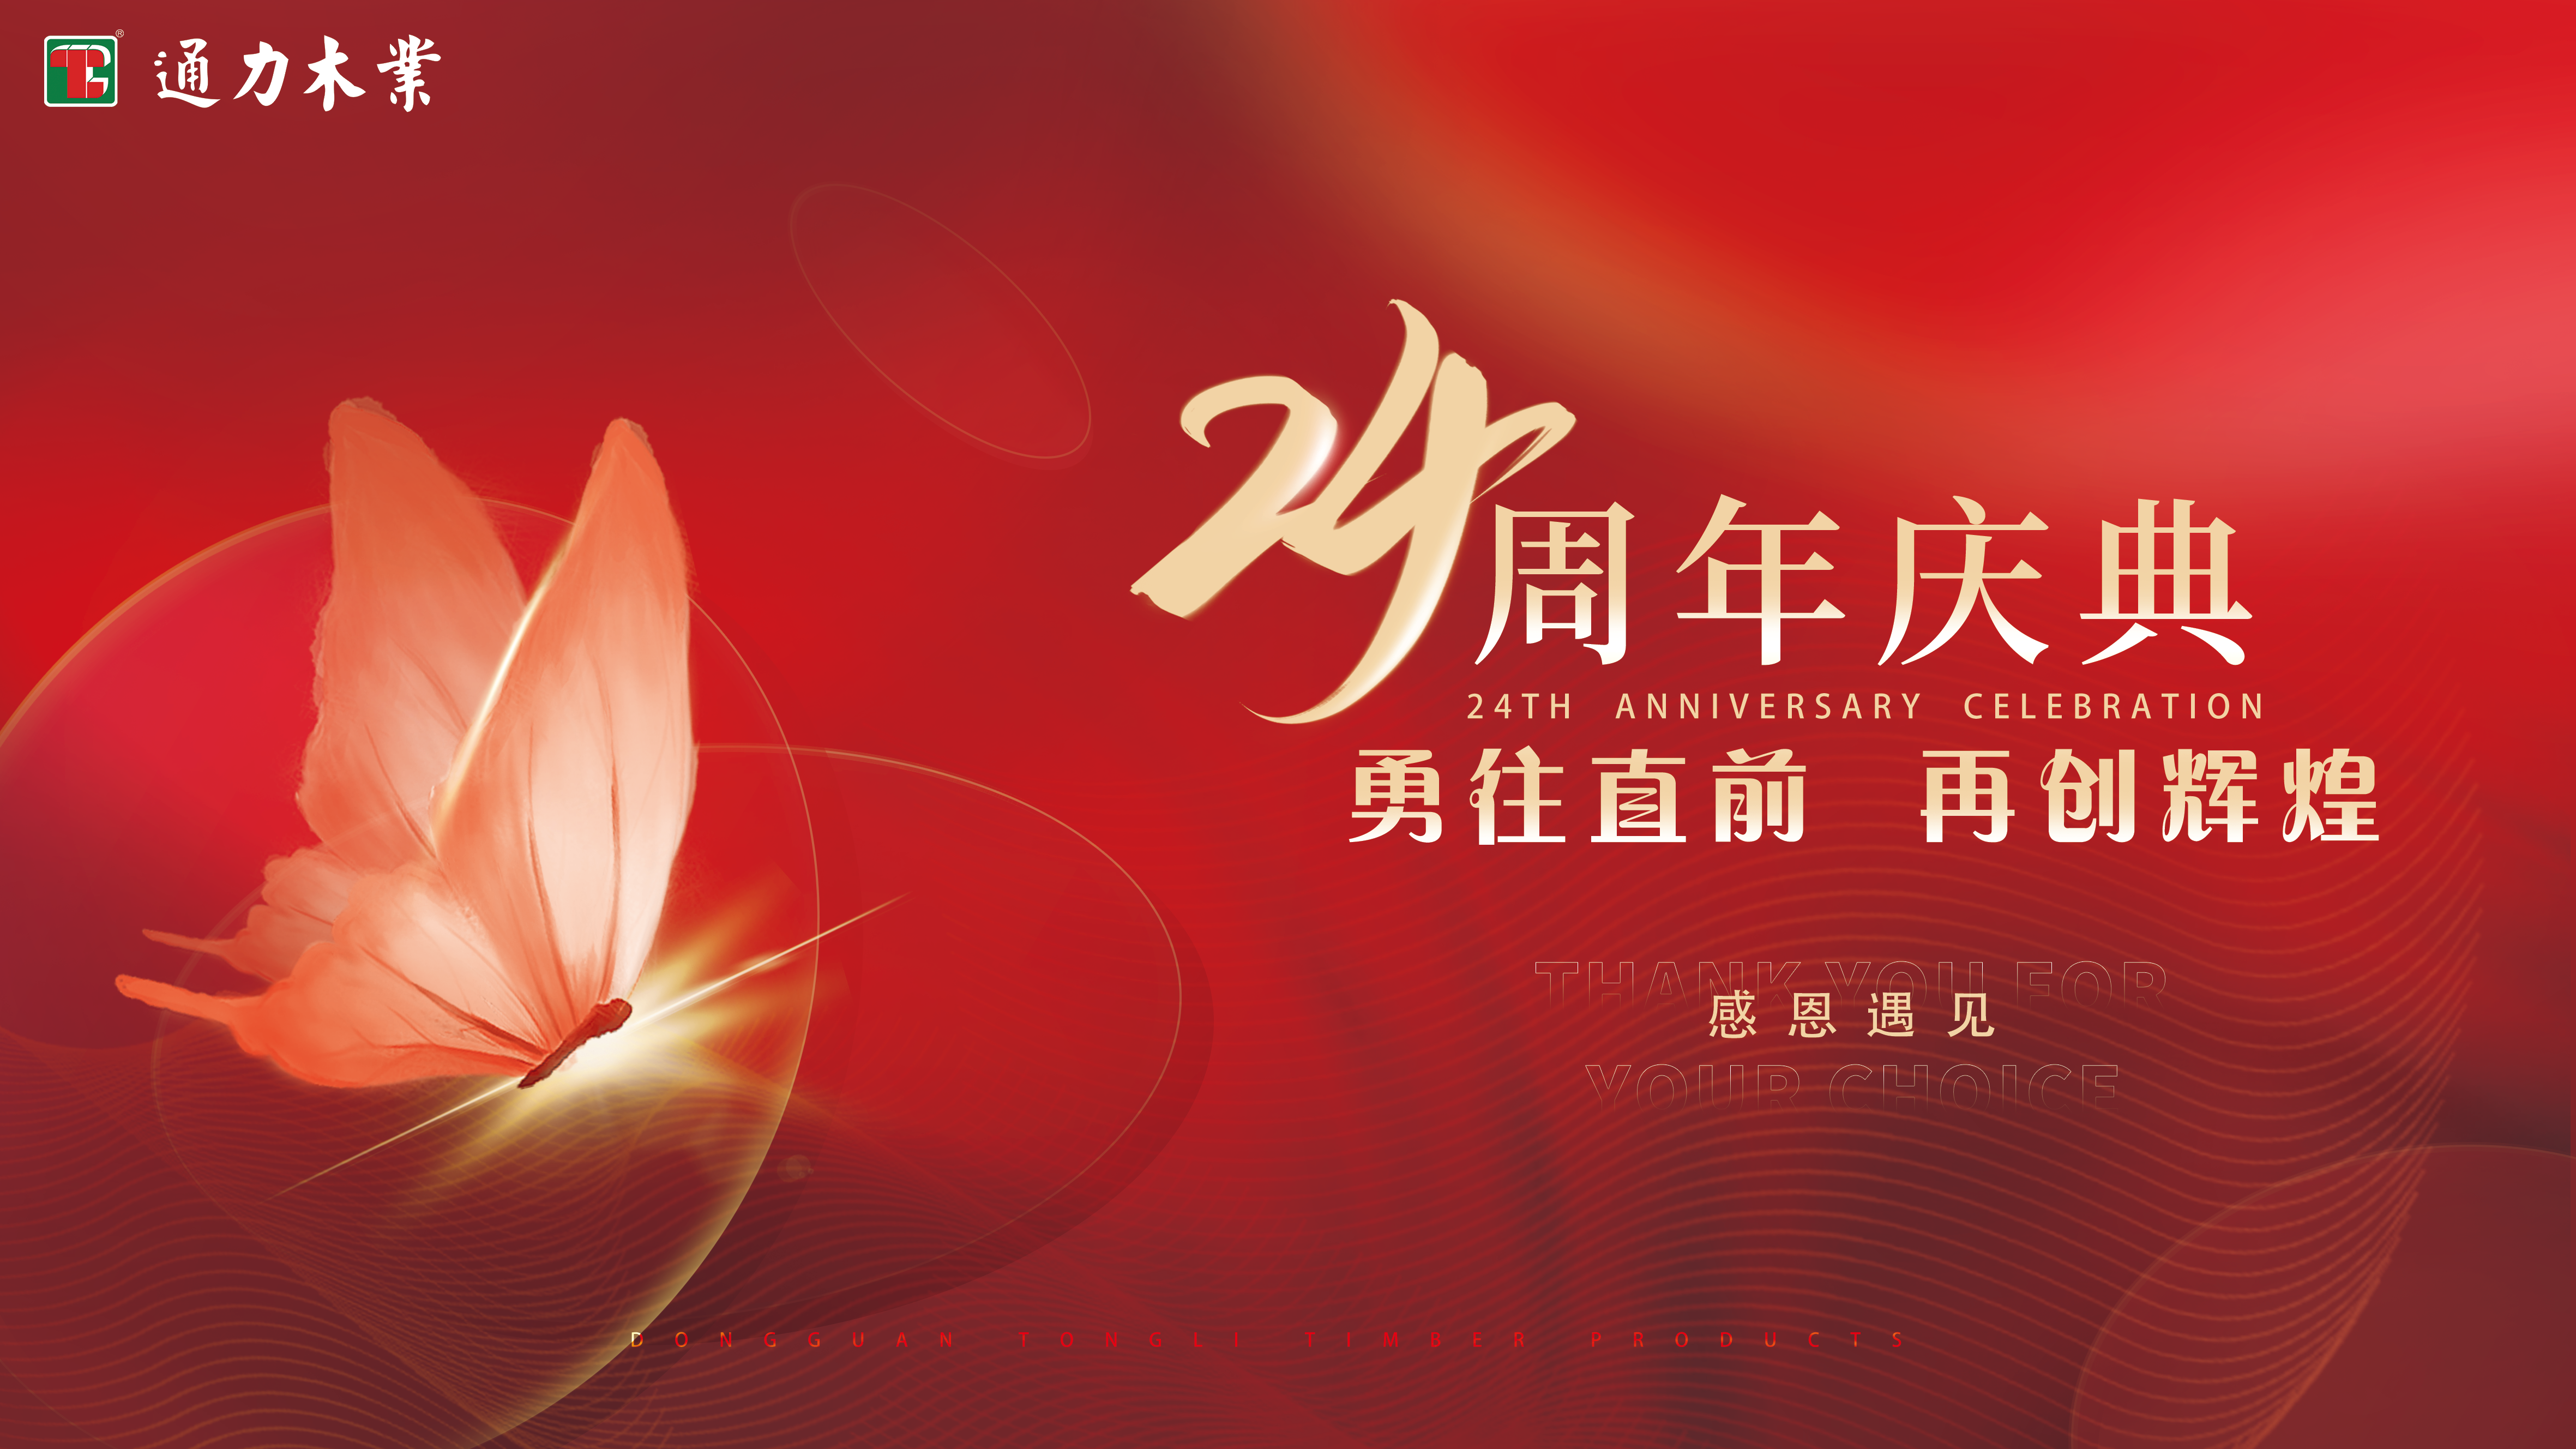 Dongguan Tongli Timber Products Co., Ltd. 24 Years of Excellence and Innovation